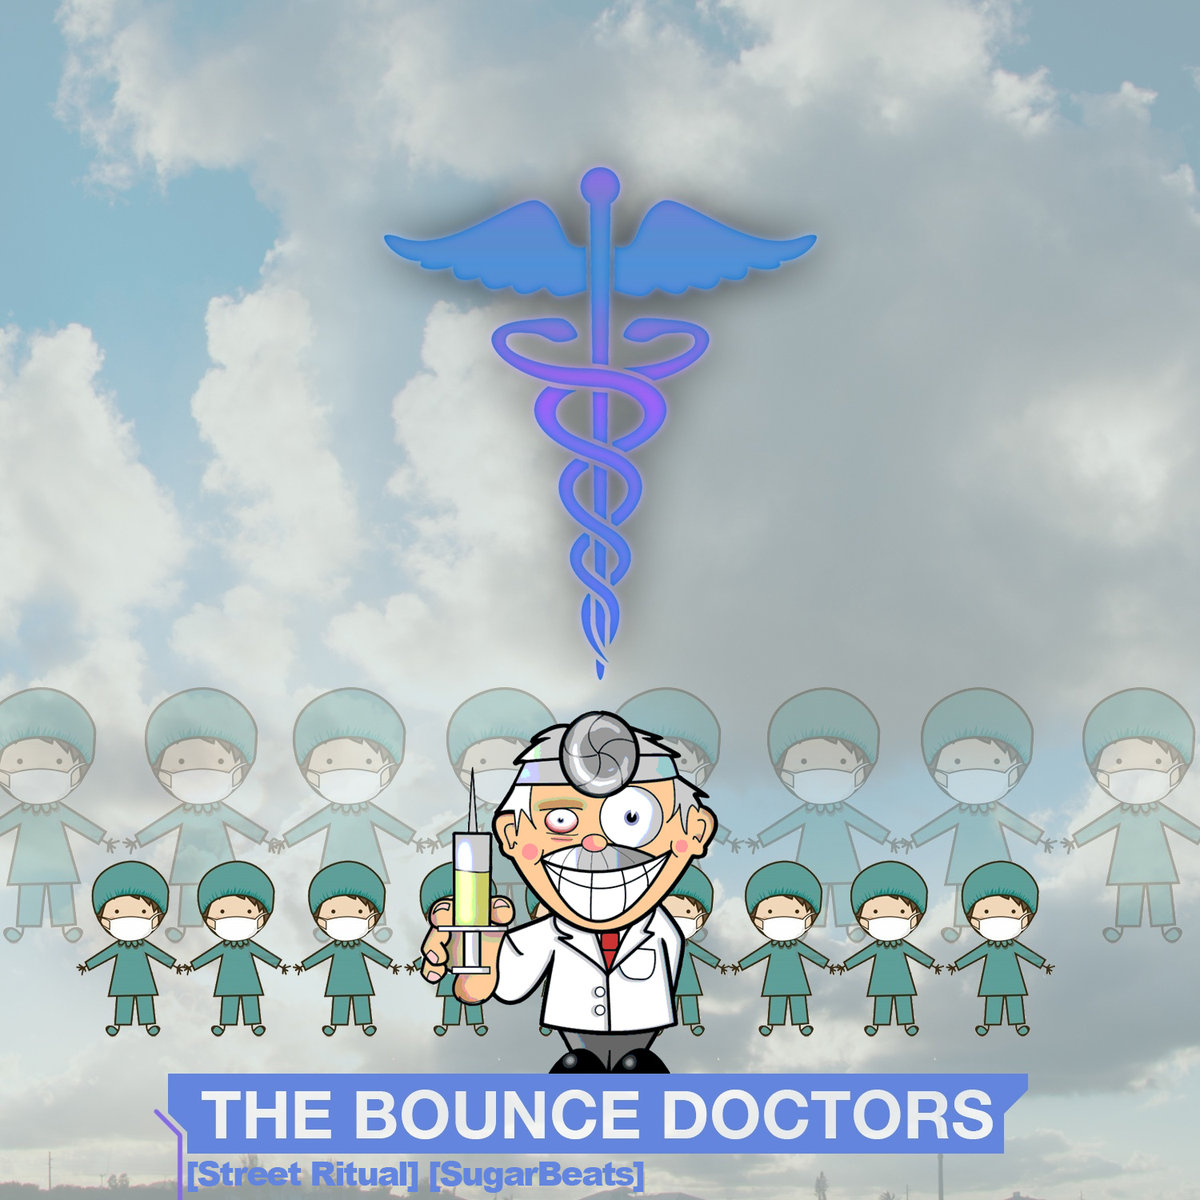 KRADDY - Water From The Sky @ 'The Bounce Doctors' album (bass, chillstep)